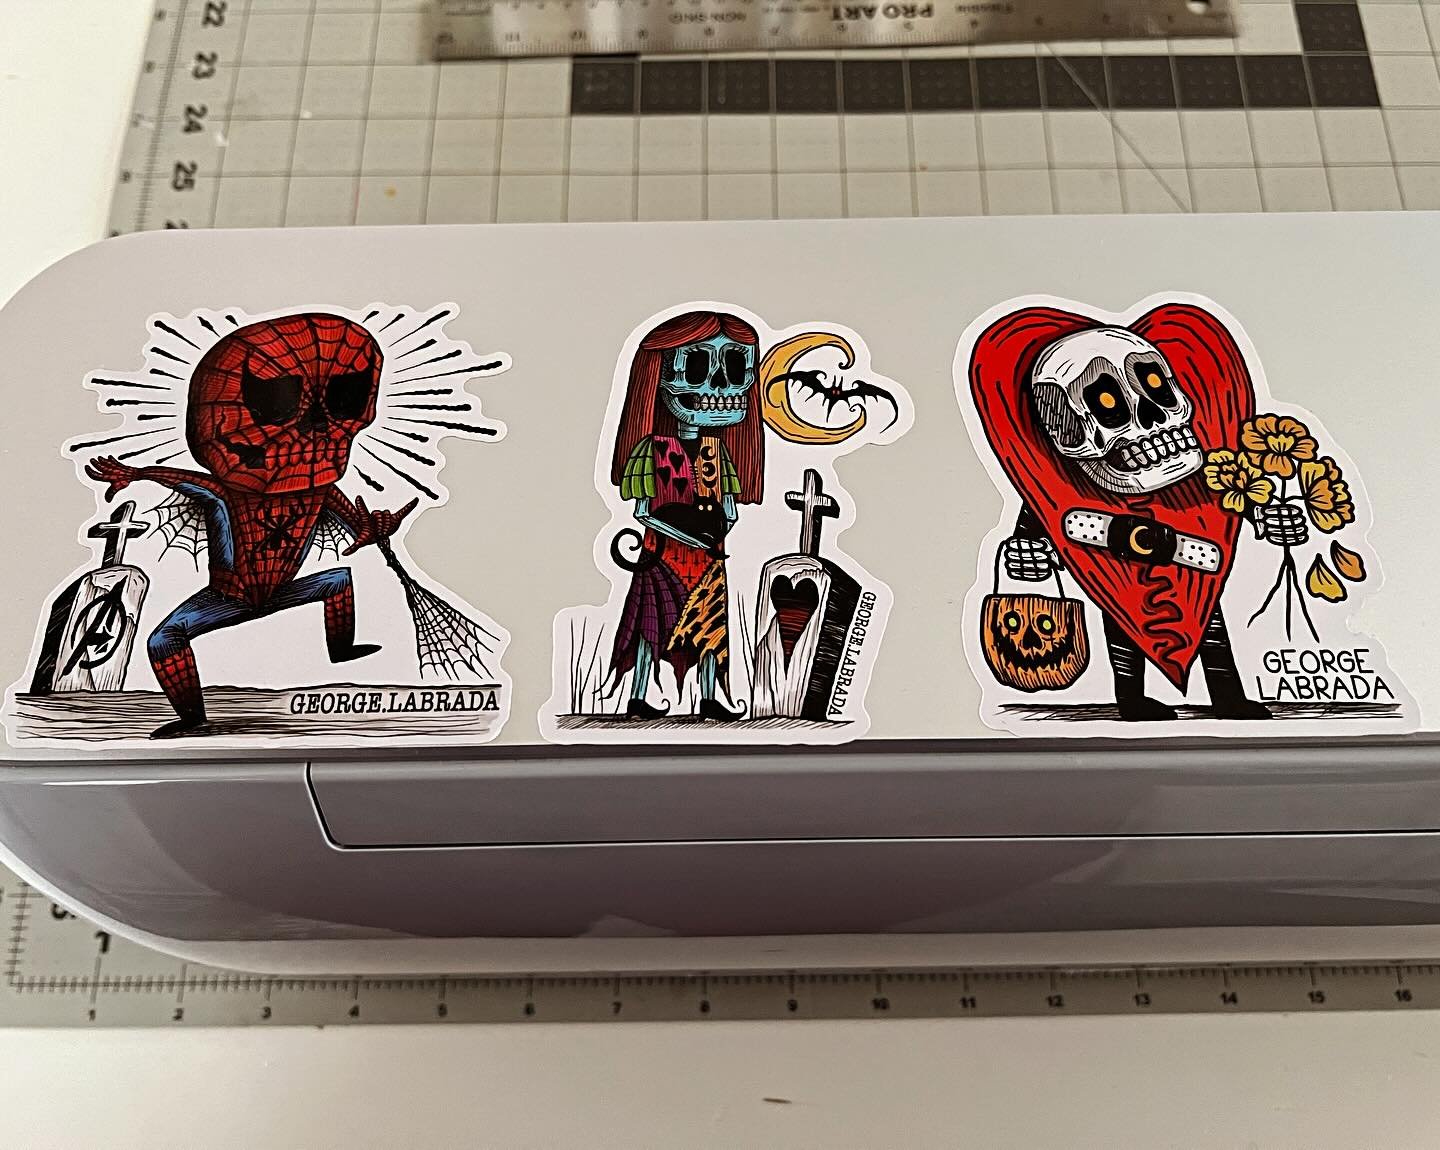 Finally found a good home for these amazing stickers by @george_labrada ❤️❤️❤️